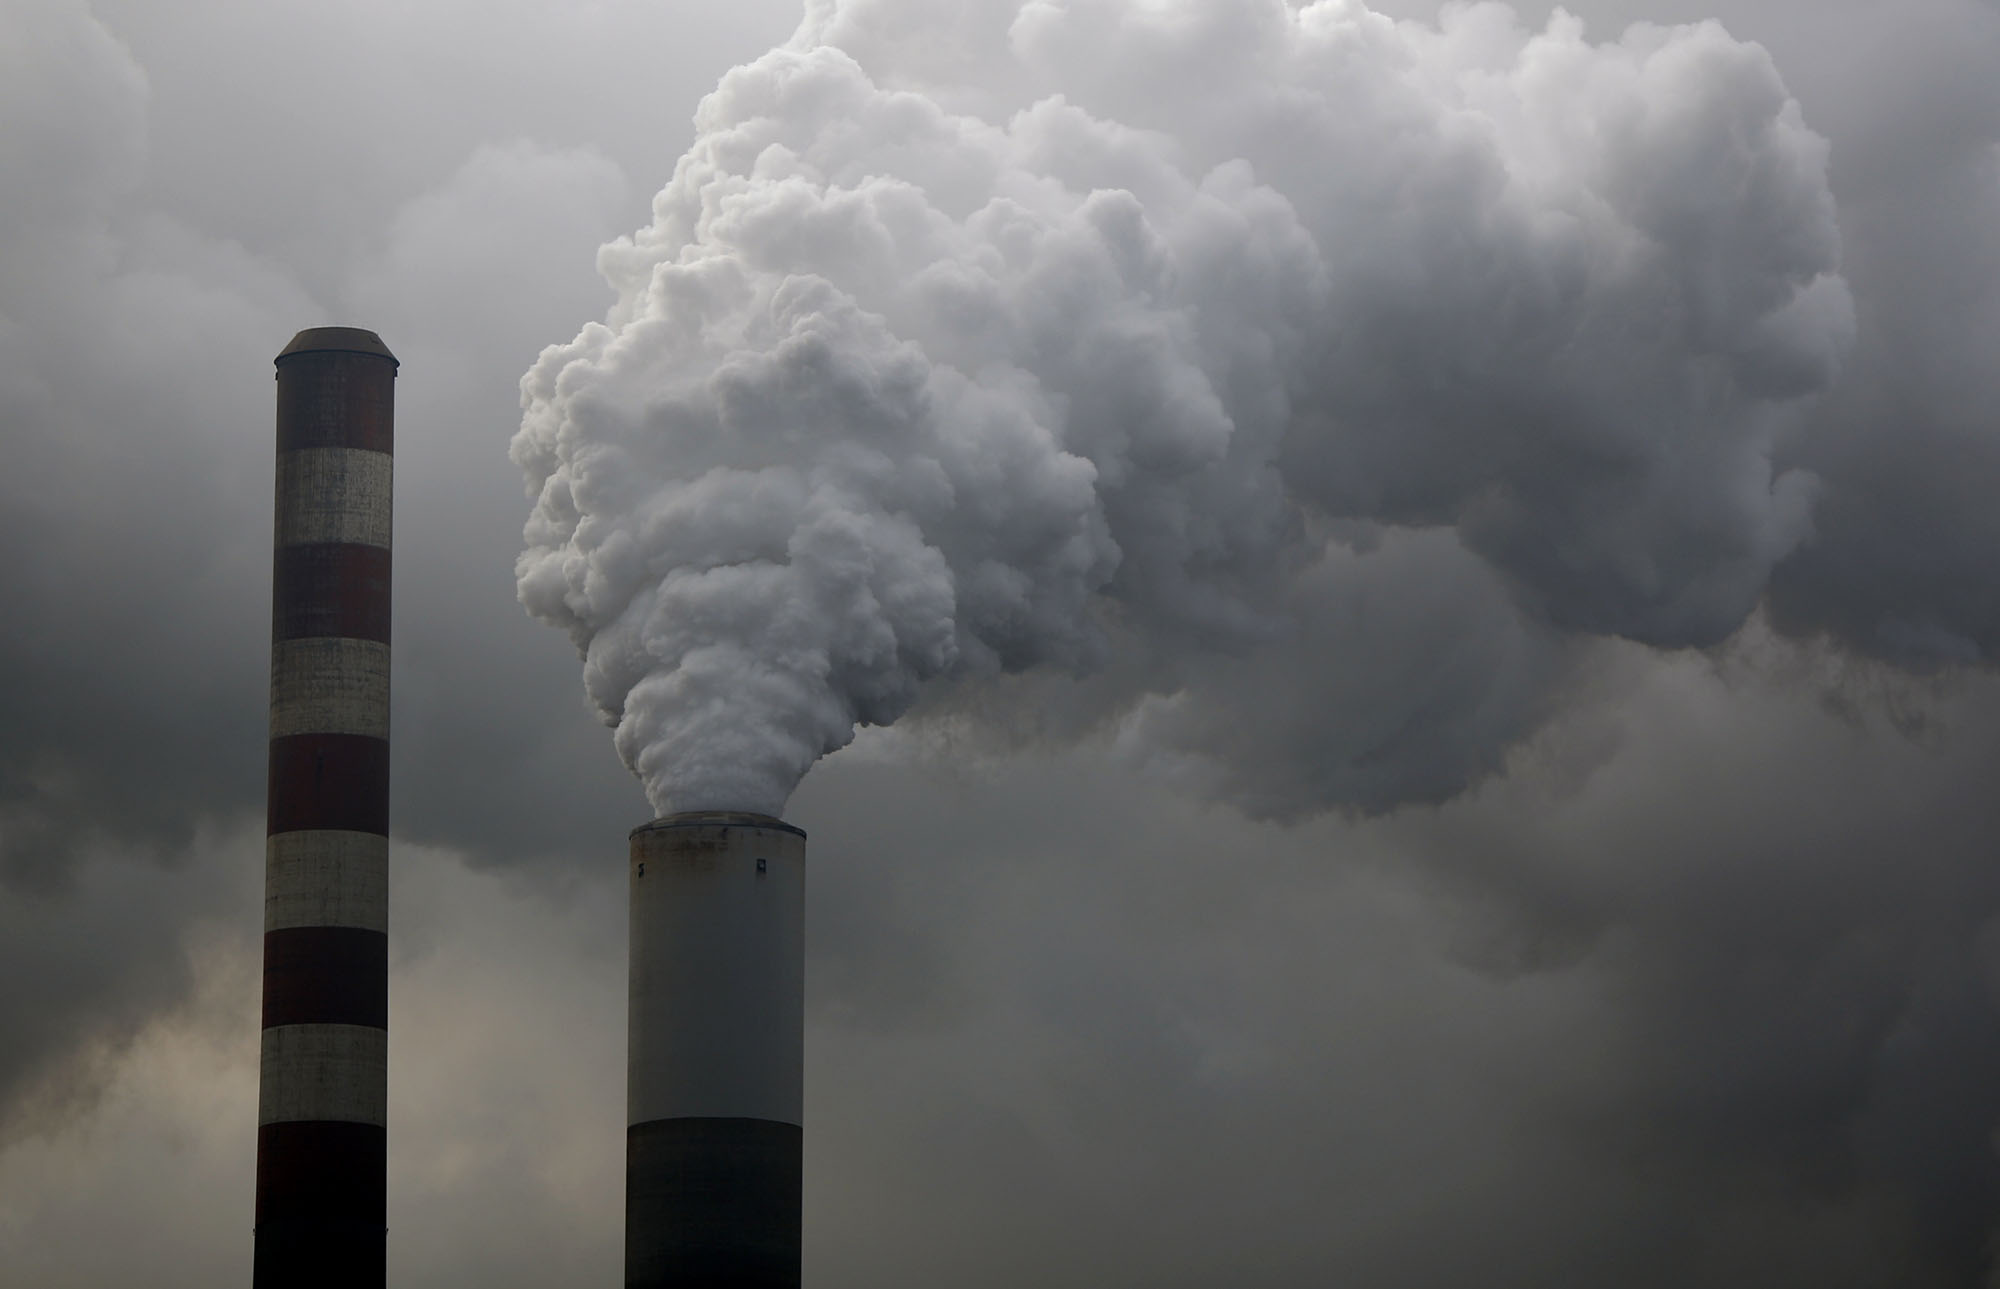 EPA Proposal Would Make Air Pollution Curbs Tougher to Justify